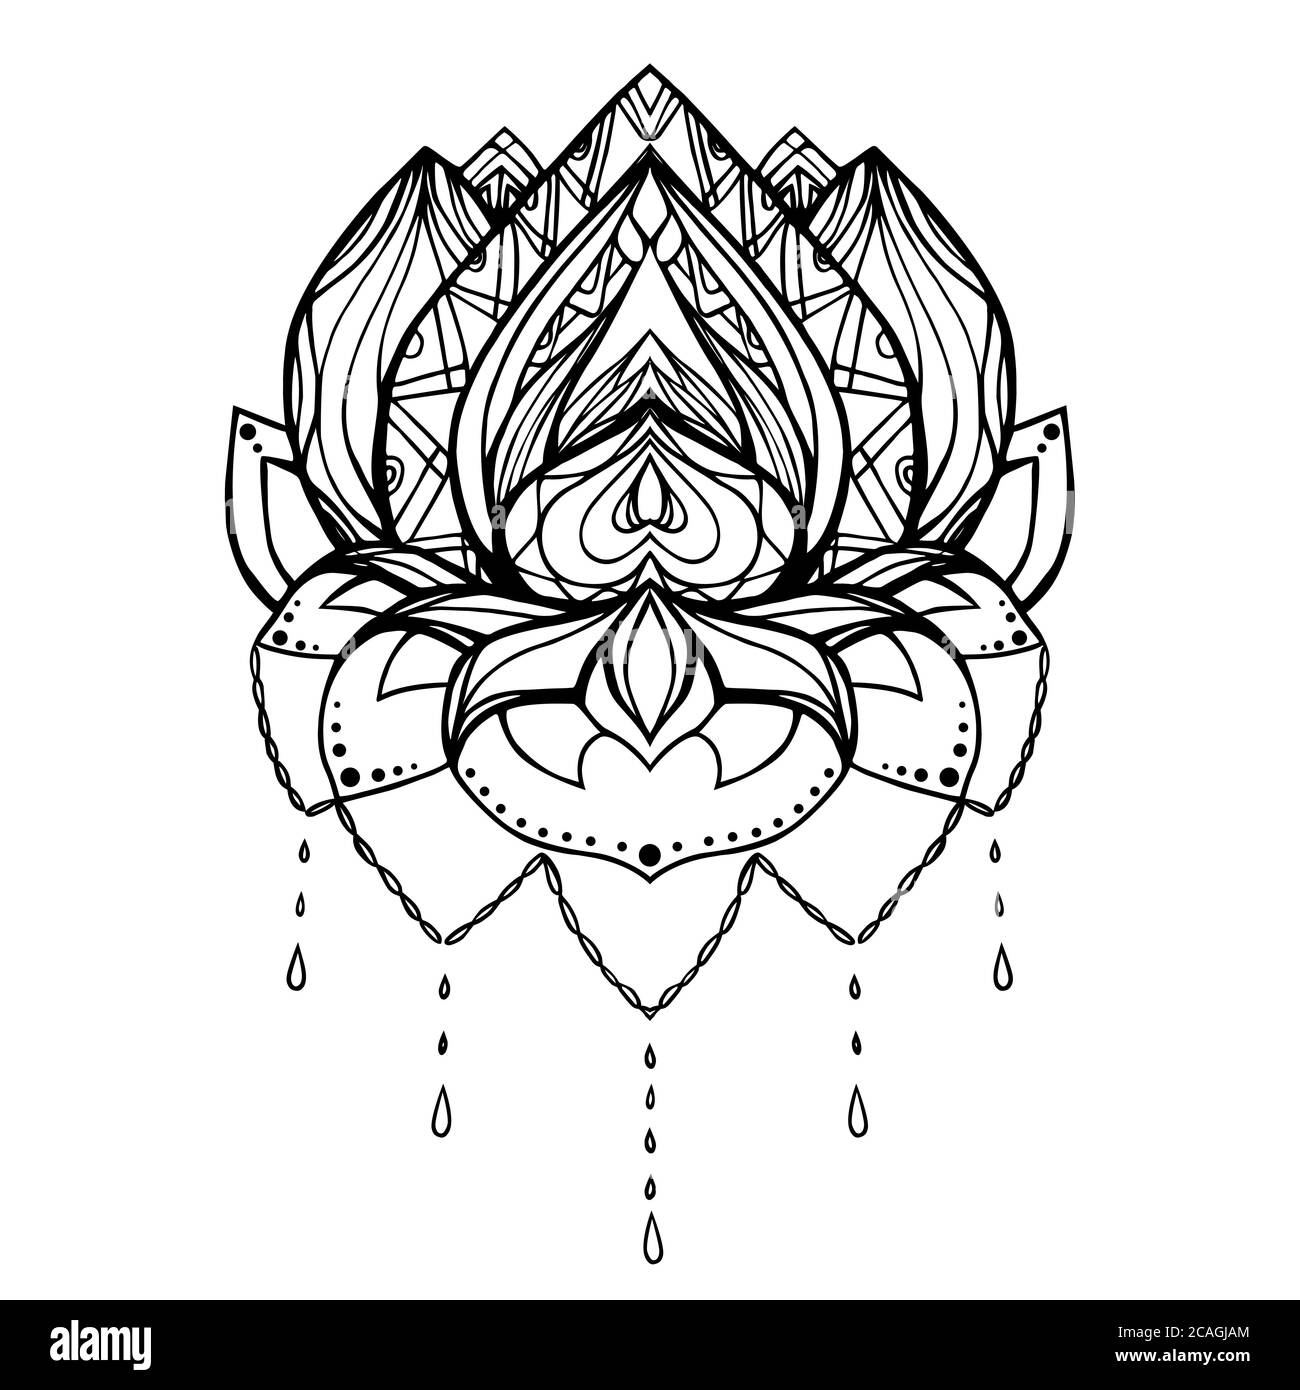 Black stylized image of a lotus flower on a white background tattoo the  symbol of commitment to the buddha in japan vector  CanStock